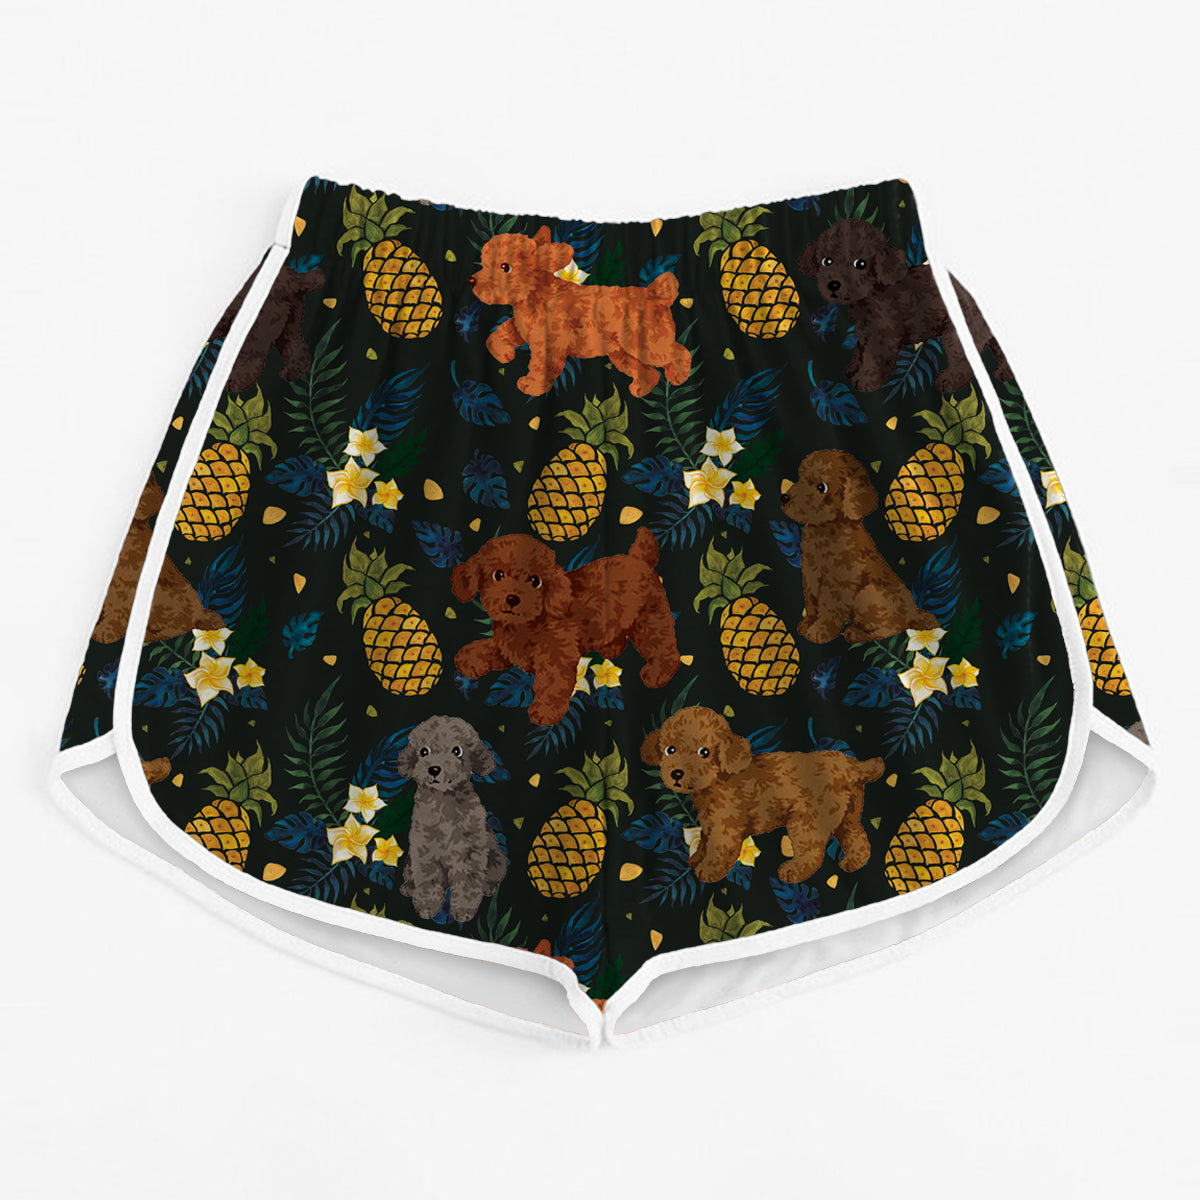 Poodle - Colorful Women's Running Shorts V3